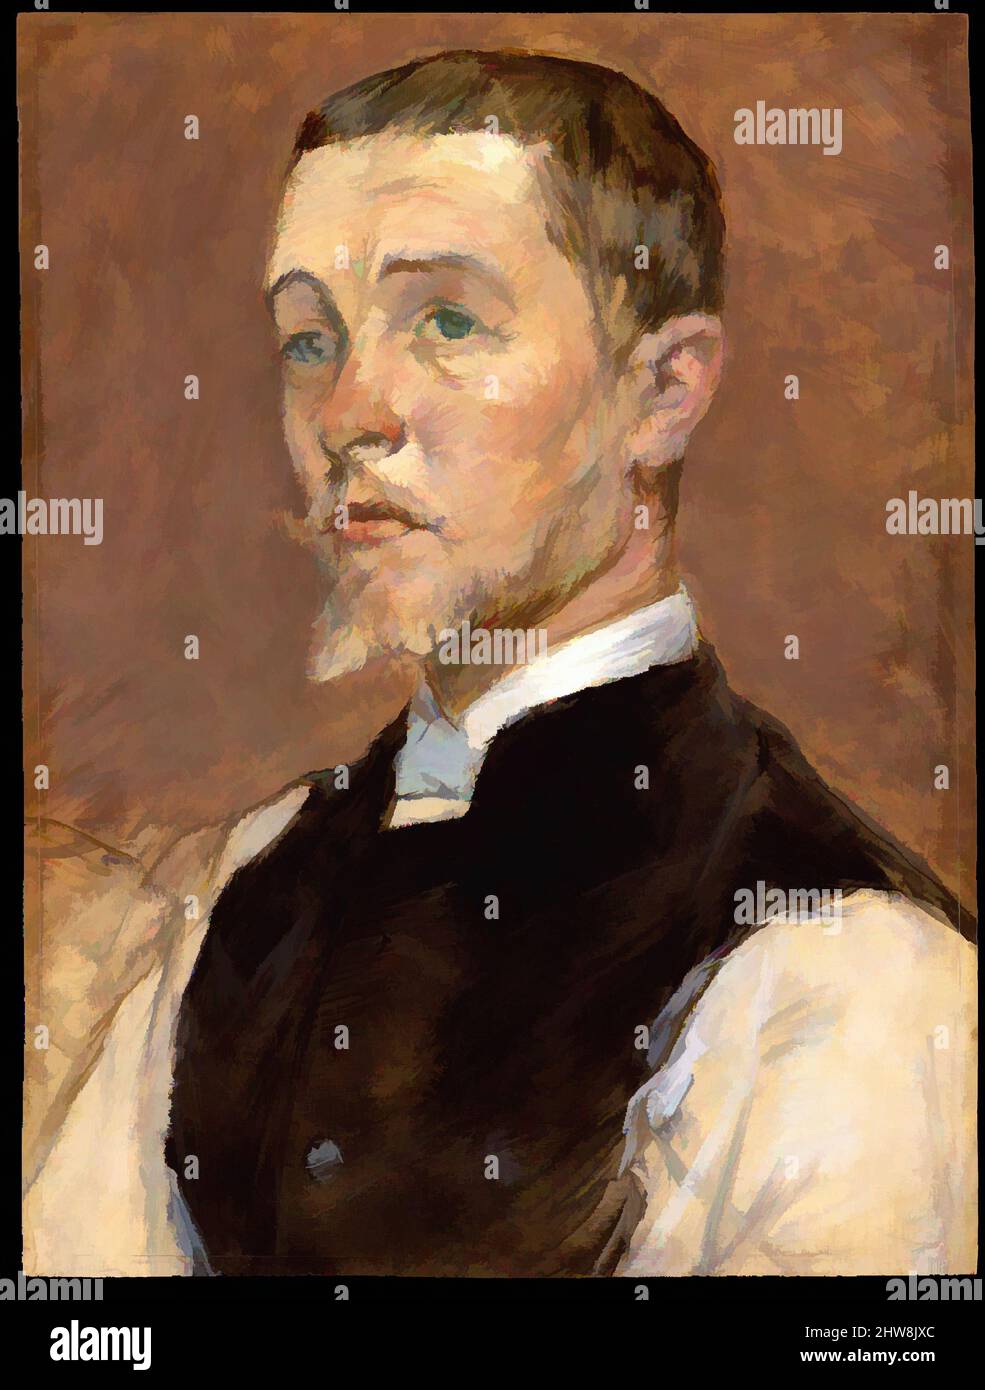 Art inspired by Albert (René) Grenier (1858–1925), 1887, Oil on wood, 13 3/8 x 10 in. (34 x 25.4 cm), Paintings, Henri de Toulouse-Lautrec (French, Albi 1864–1901 Saint-André-du-Bois), Grenier and Lautrec were fellow students in the Paris atelier of academic history painter Fernand, Classic works modernized by Artotop with a splash of modernity. Shapes, color and value, eye-catching visual impact on art. Emotions through freedom of artworks in a contemporary way. A timeless message pursuing a wildly creative new direction. Artists turning to the digital medium and creating the Artotop NFT Stock Photo